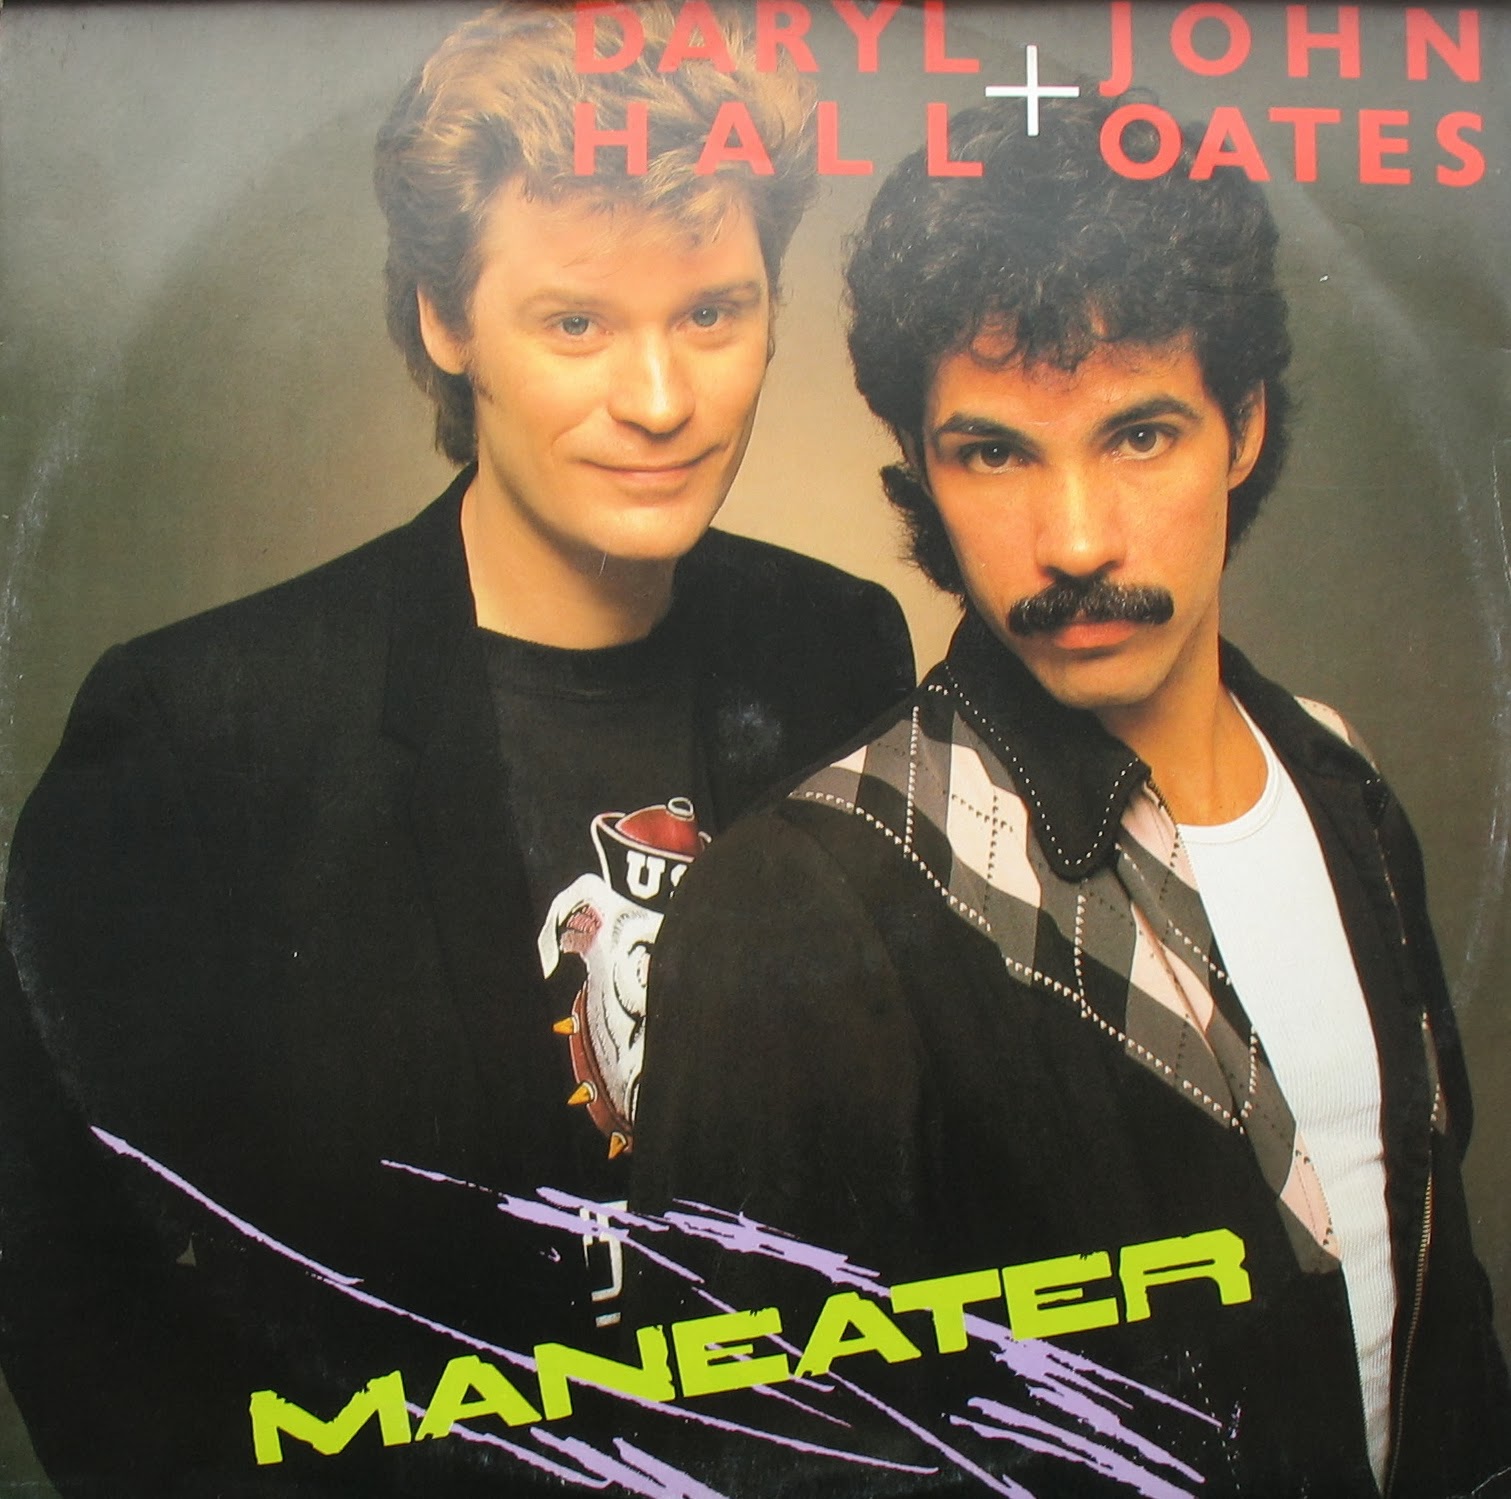 Hall and oates hit singles